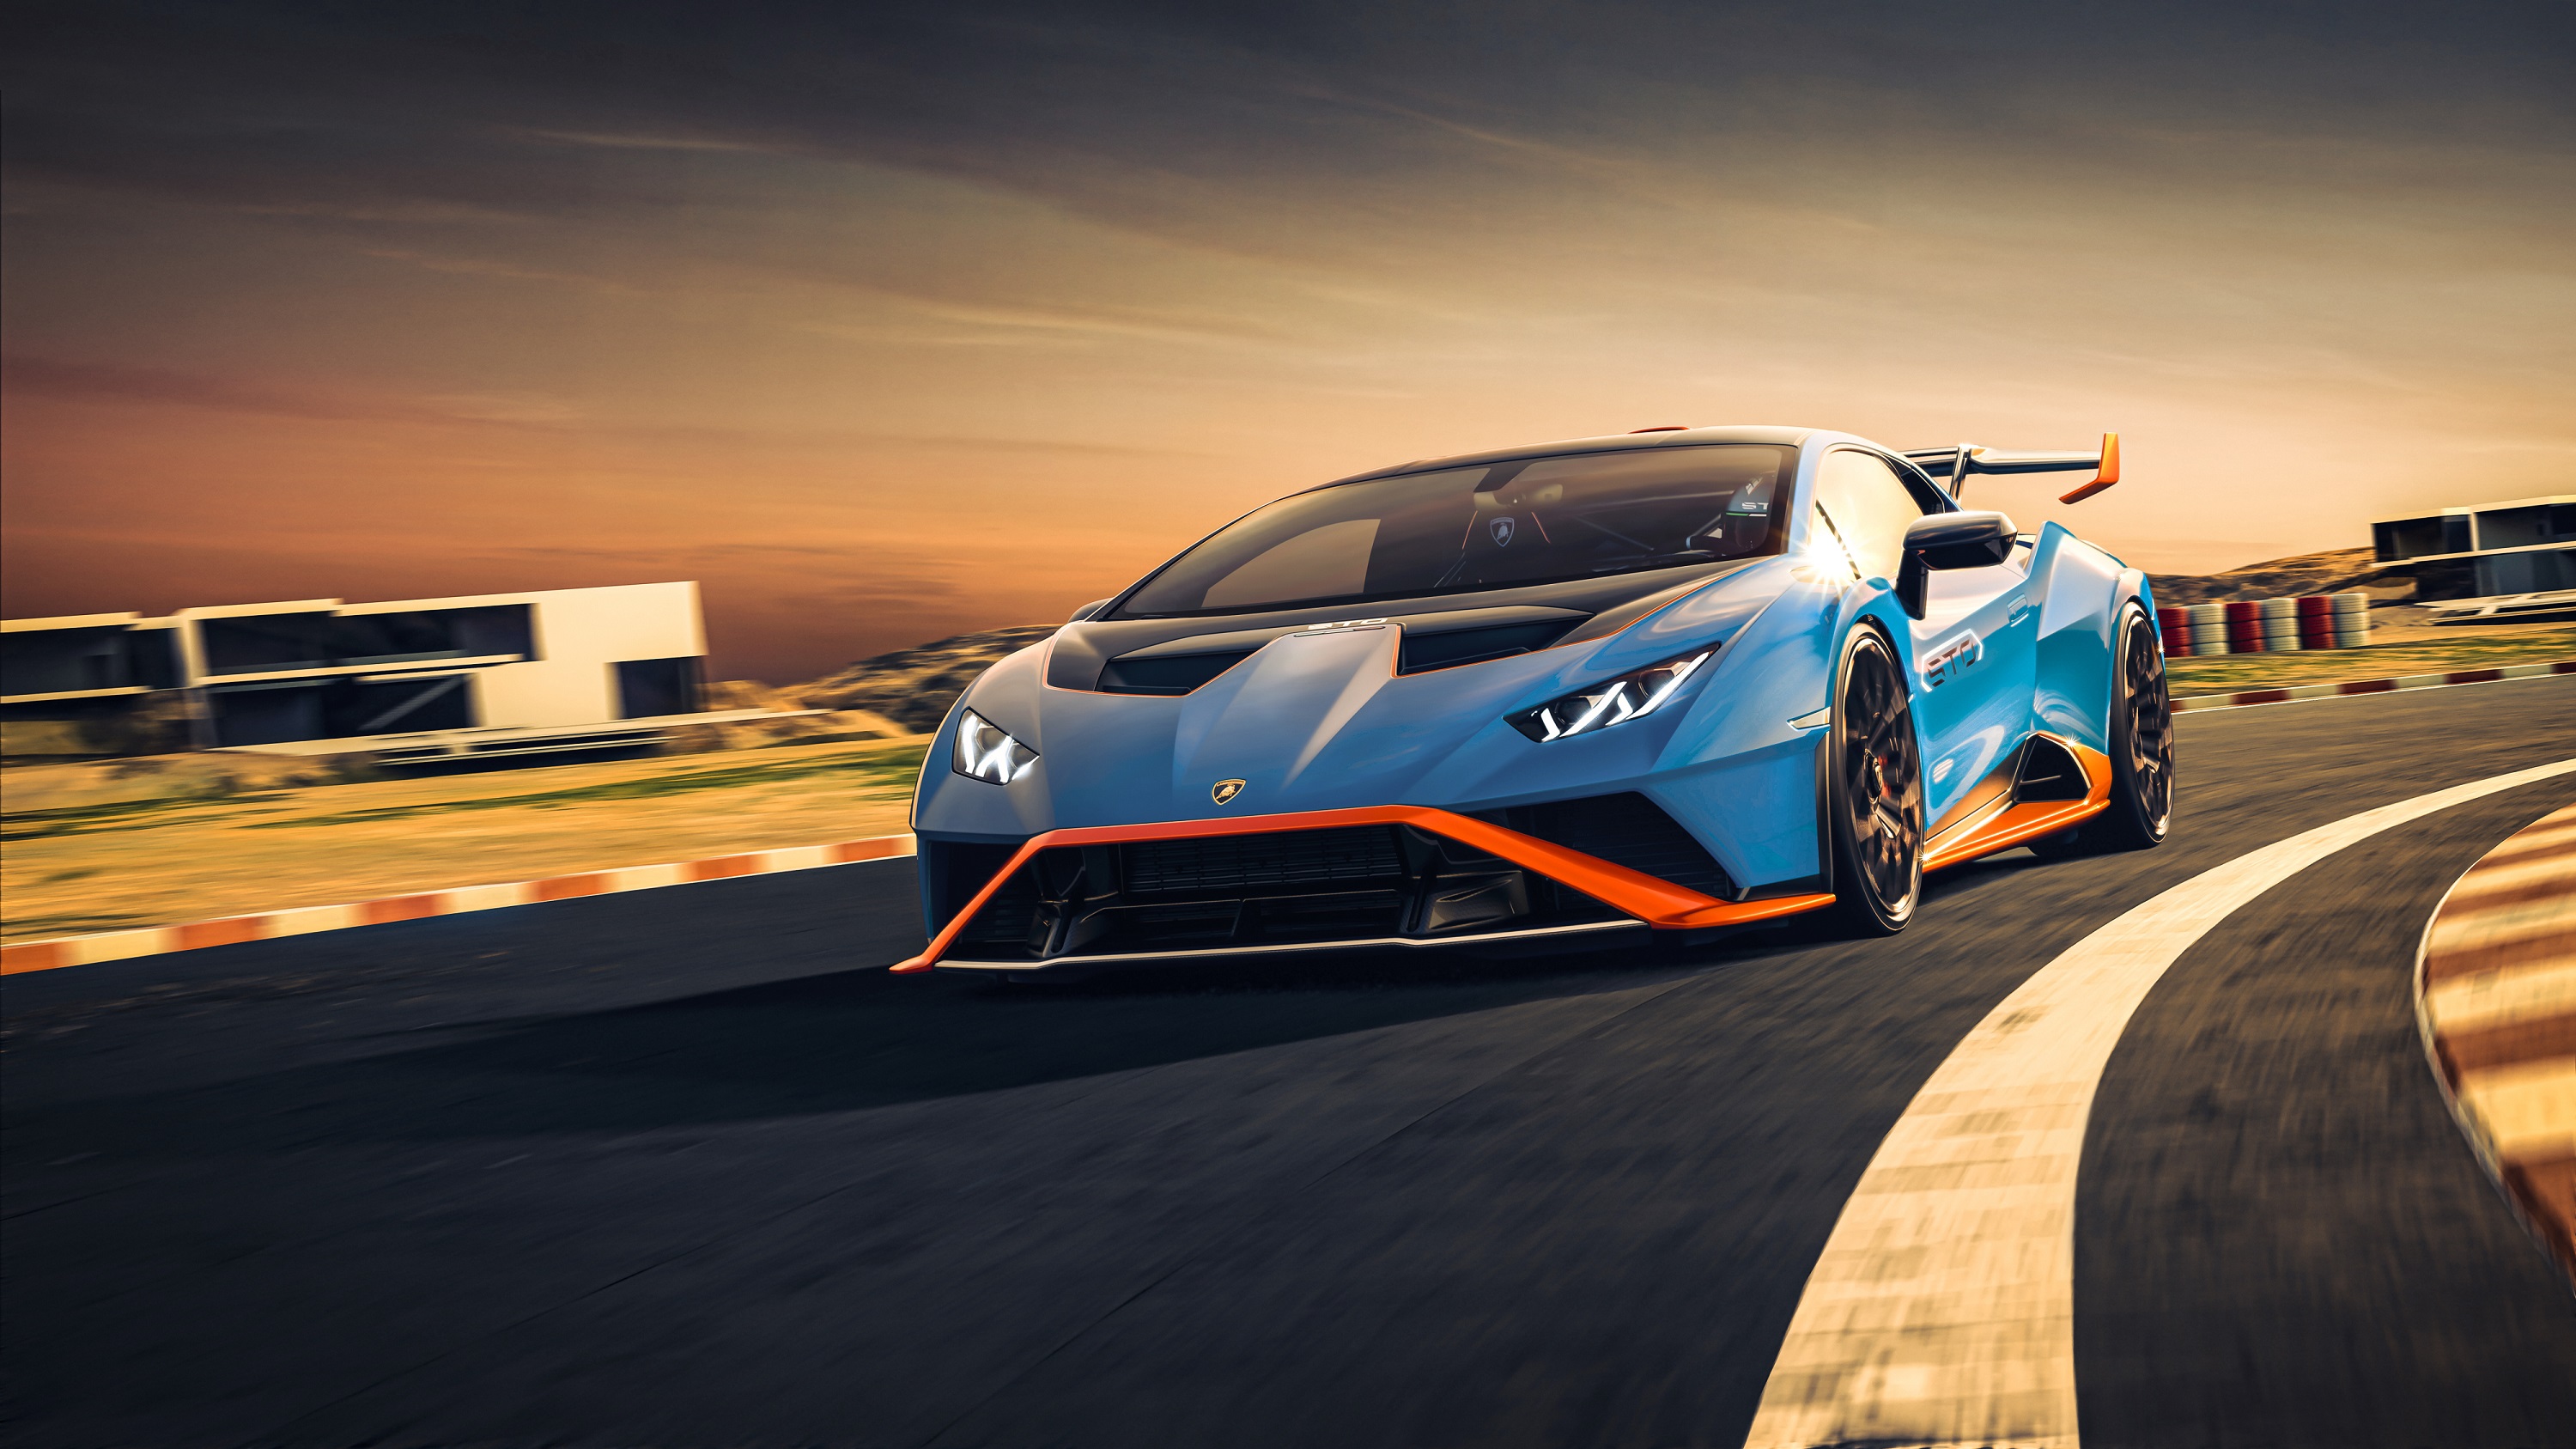 Automobili Lamborghini closes 2020 with 7,430 cars delivered  and six new product launches